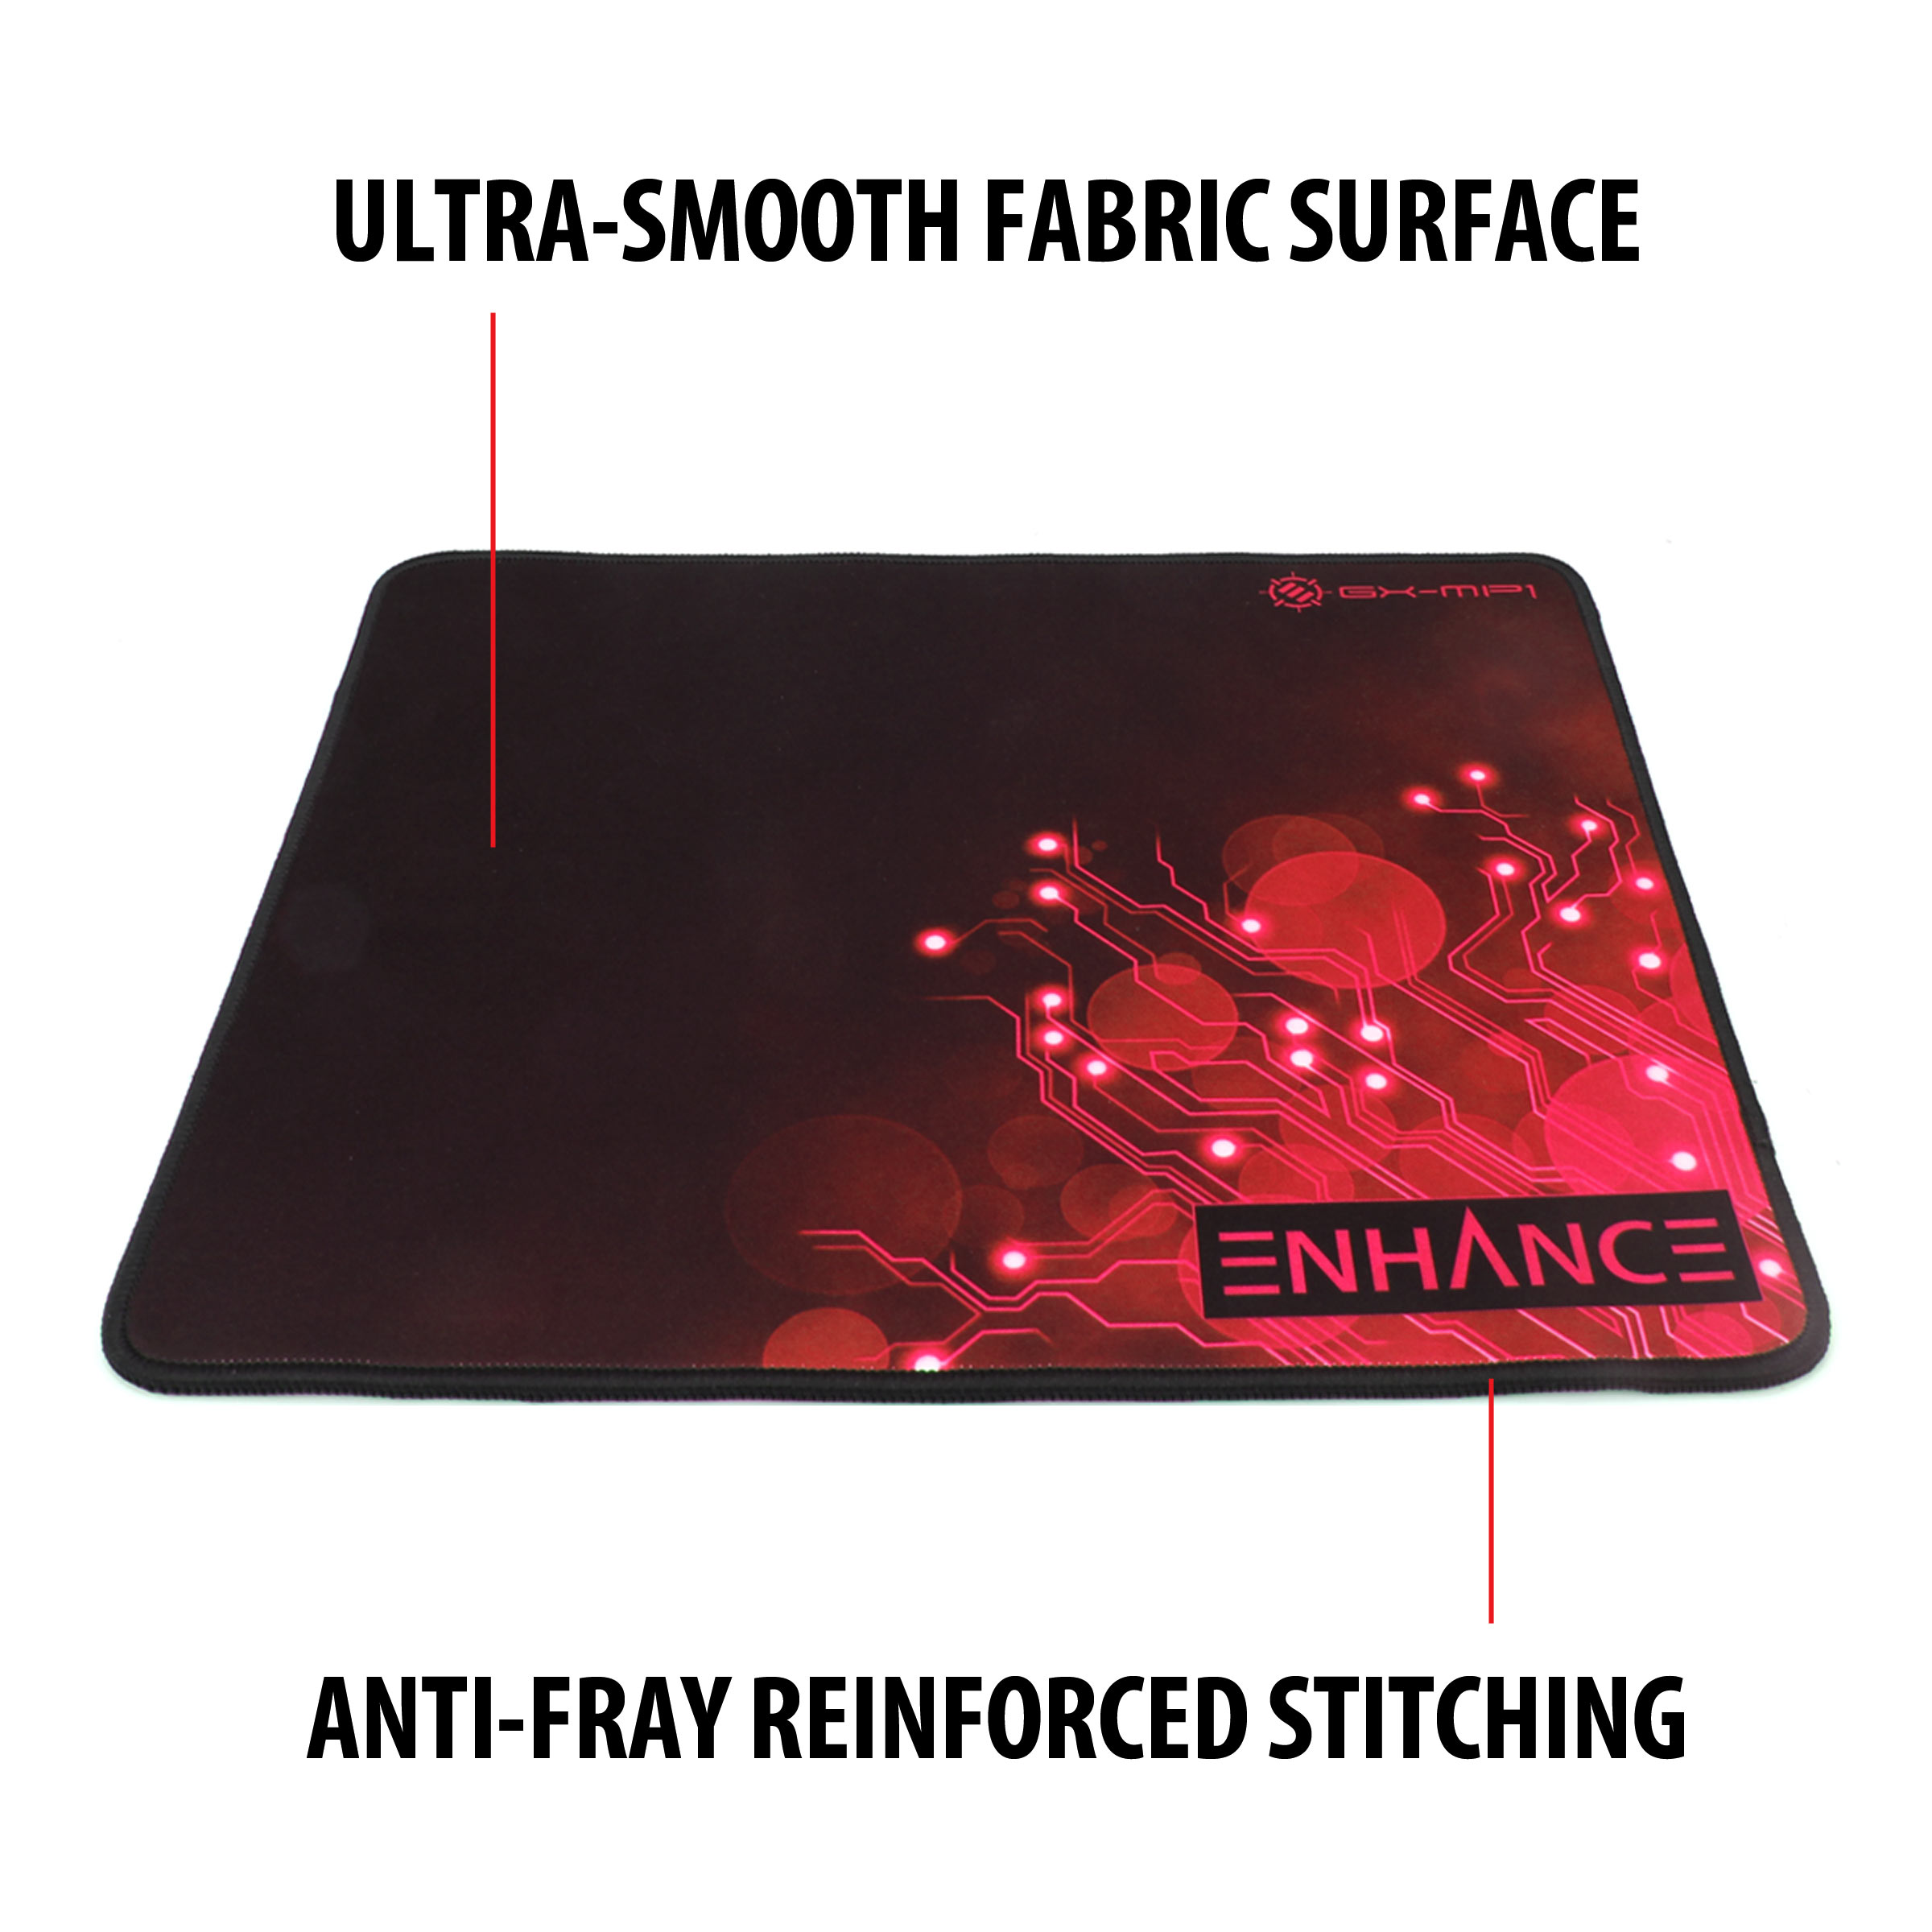 ENHANCE Pro Red Gaming Mouse Pad Extended - Precision Tracking Surface , Non-Slip Base , Anti-Fray Stitching for World of Warcraft: Legion , Battlefield 1 , Dota 2 , League of Legends and More - image 4 of 9